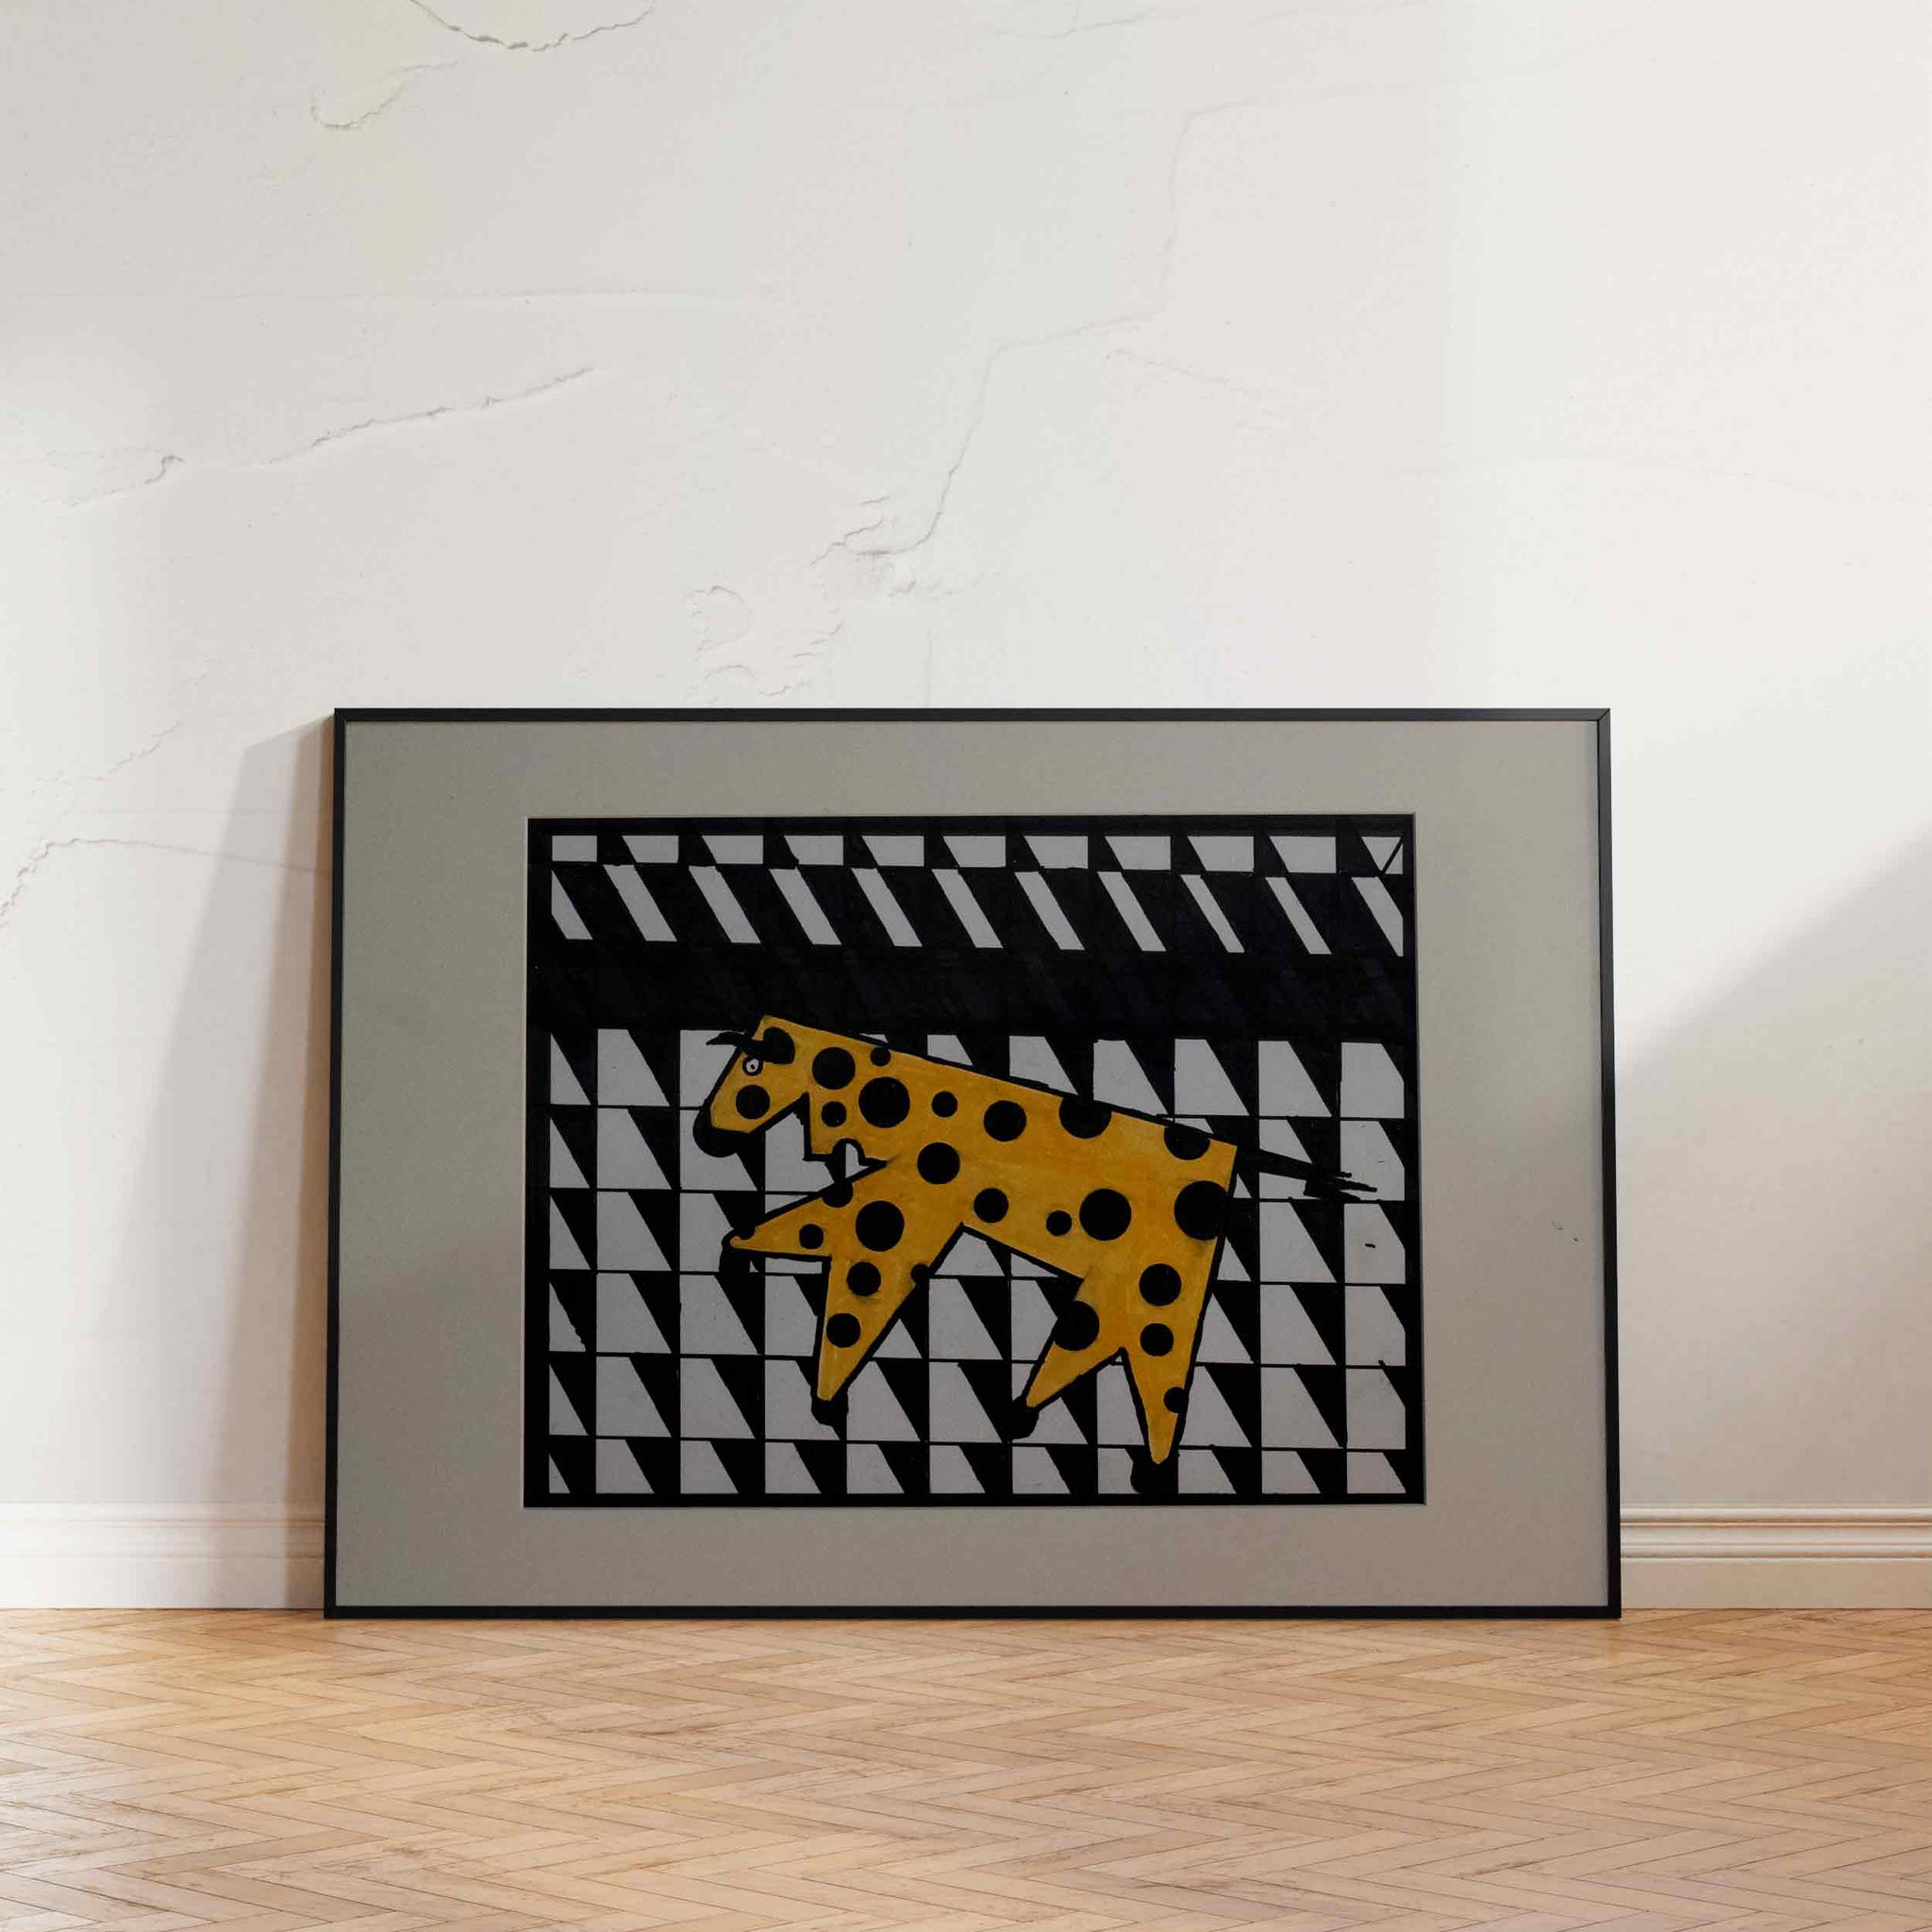 "Geometric Beast”, A bold cubist artwork of a powerful bull in overlapping gray polygons with splashes of orange and black polka dots.